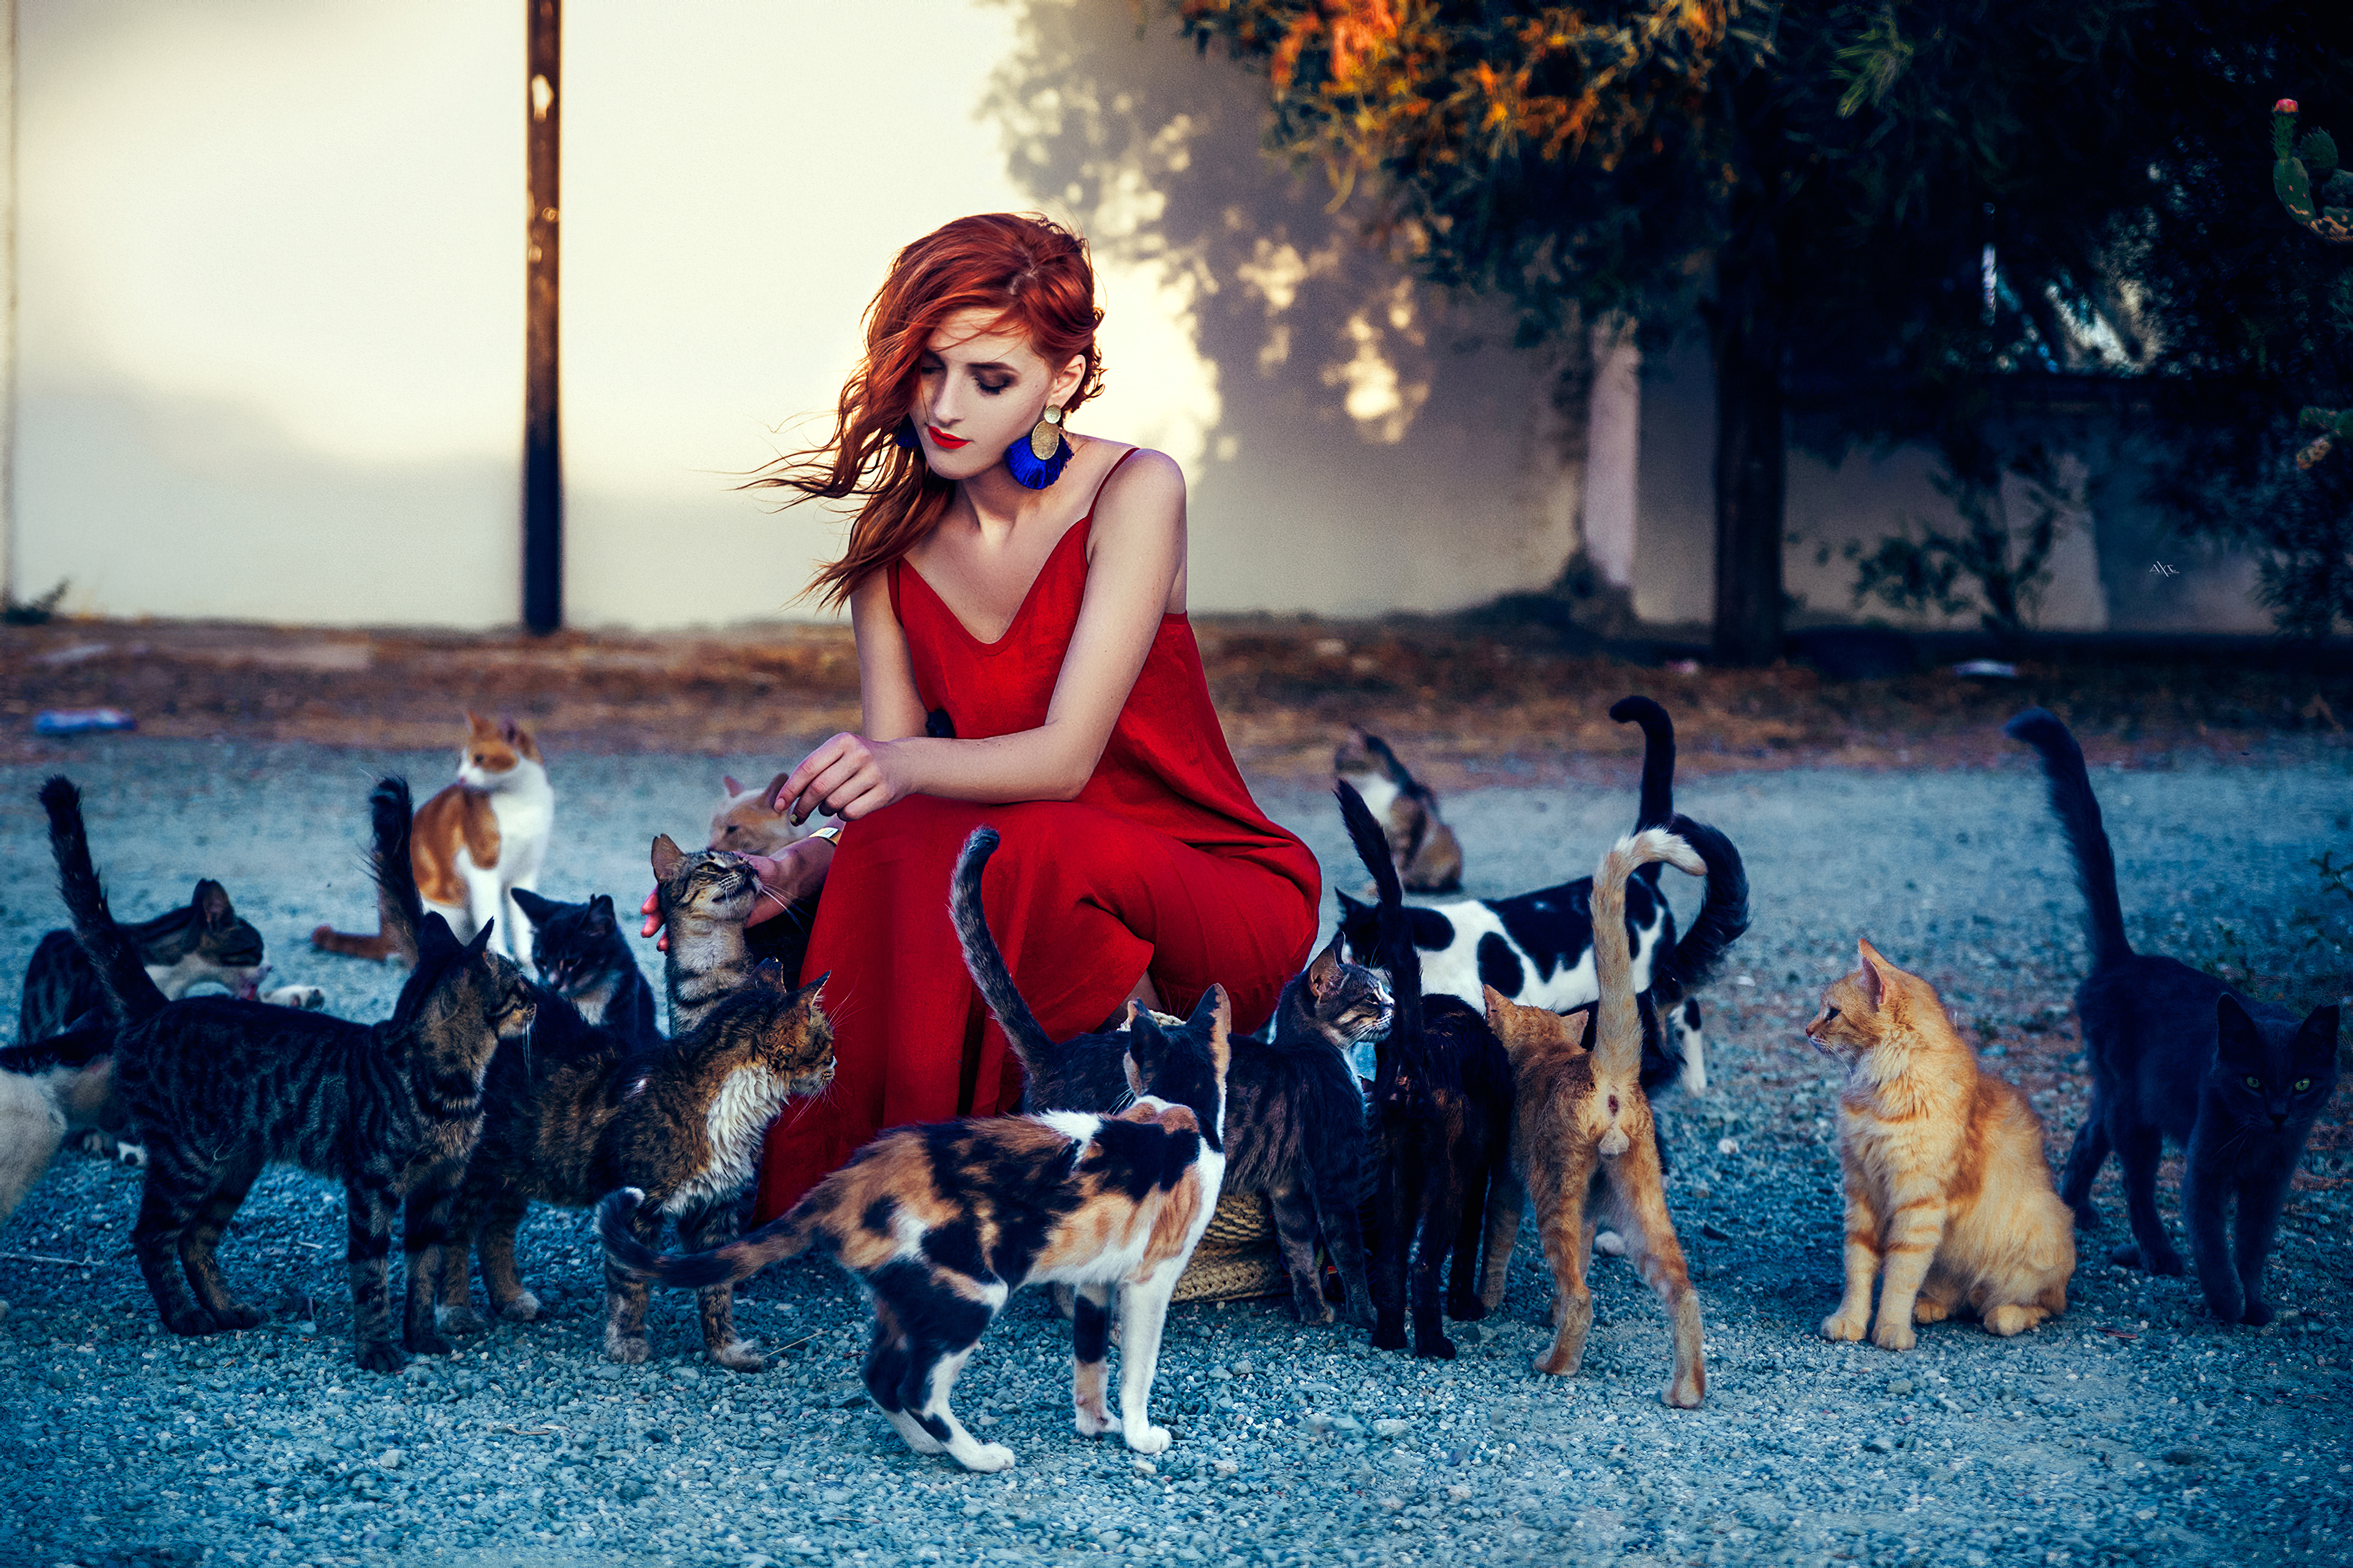 girl in red dress playing with cats 1575665946 - Girl In Red Dress Playing With Cats -